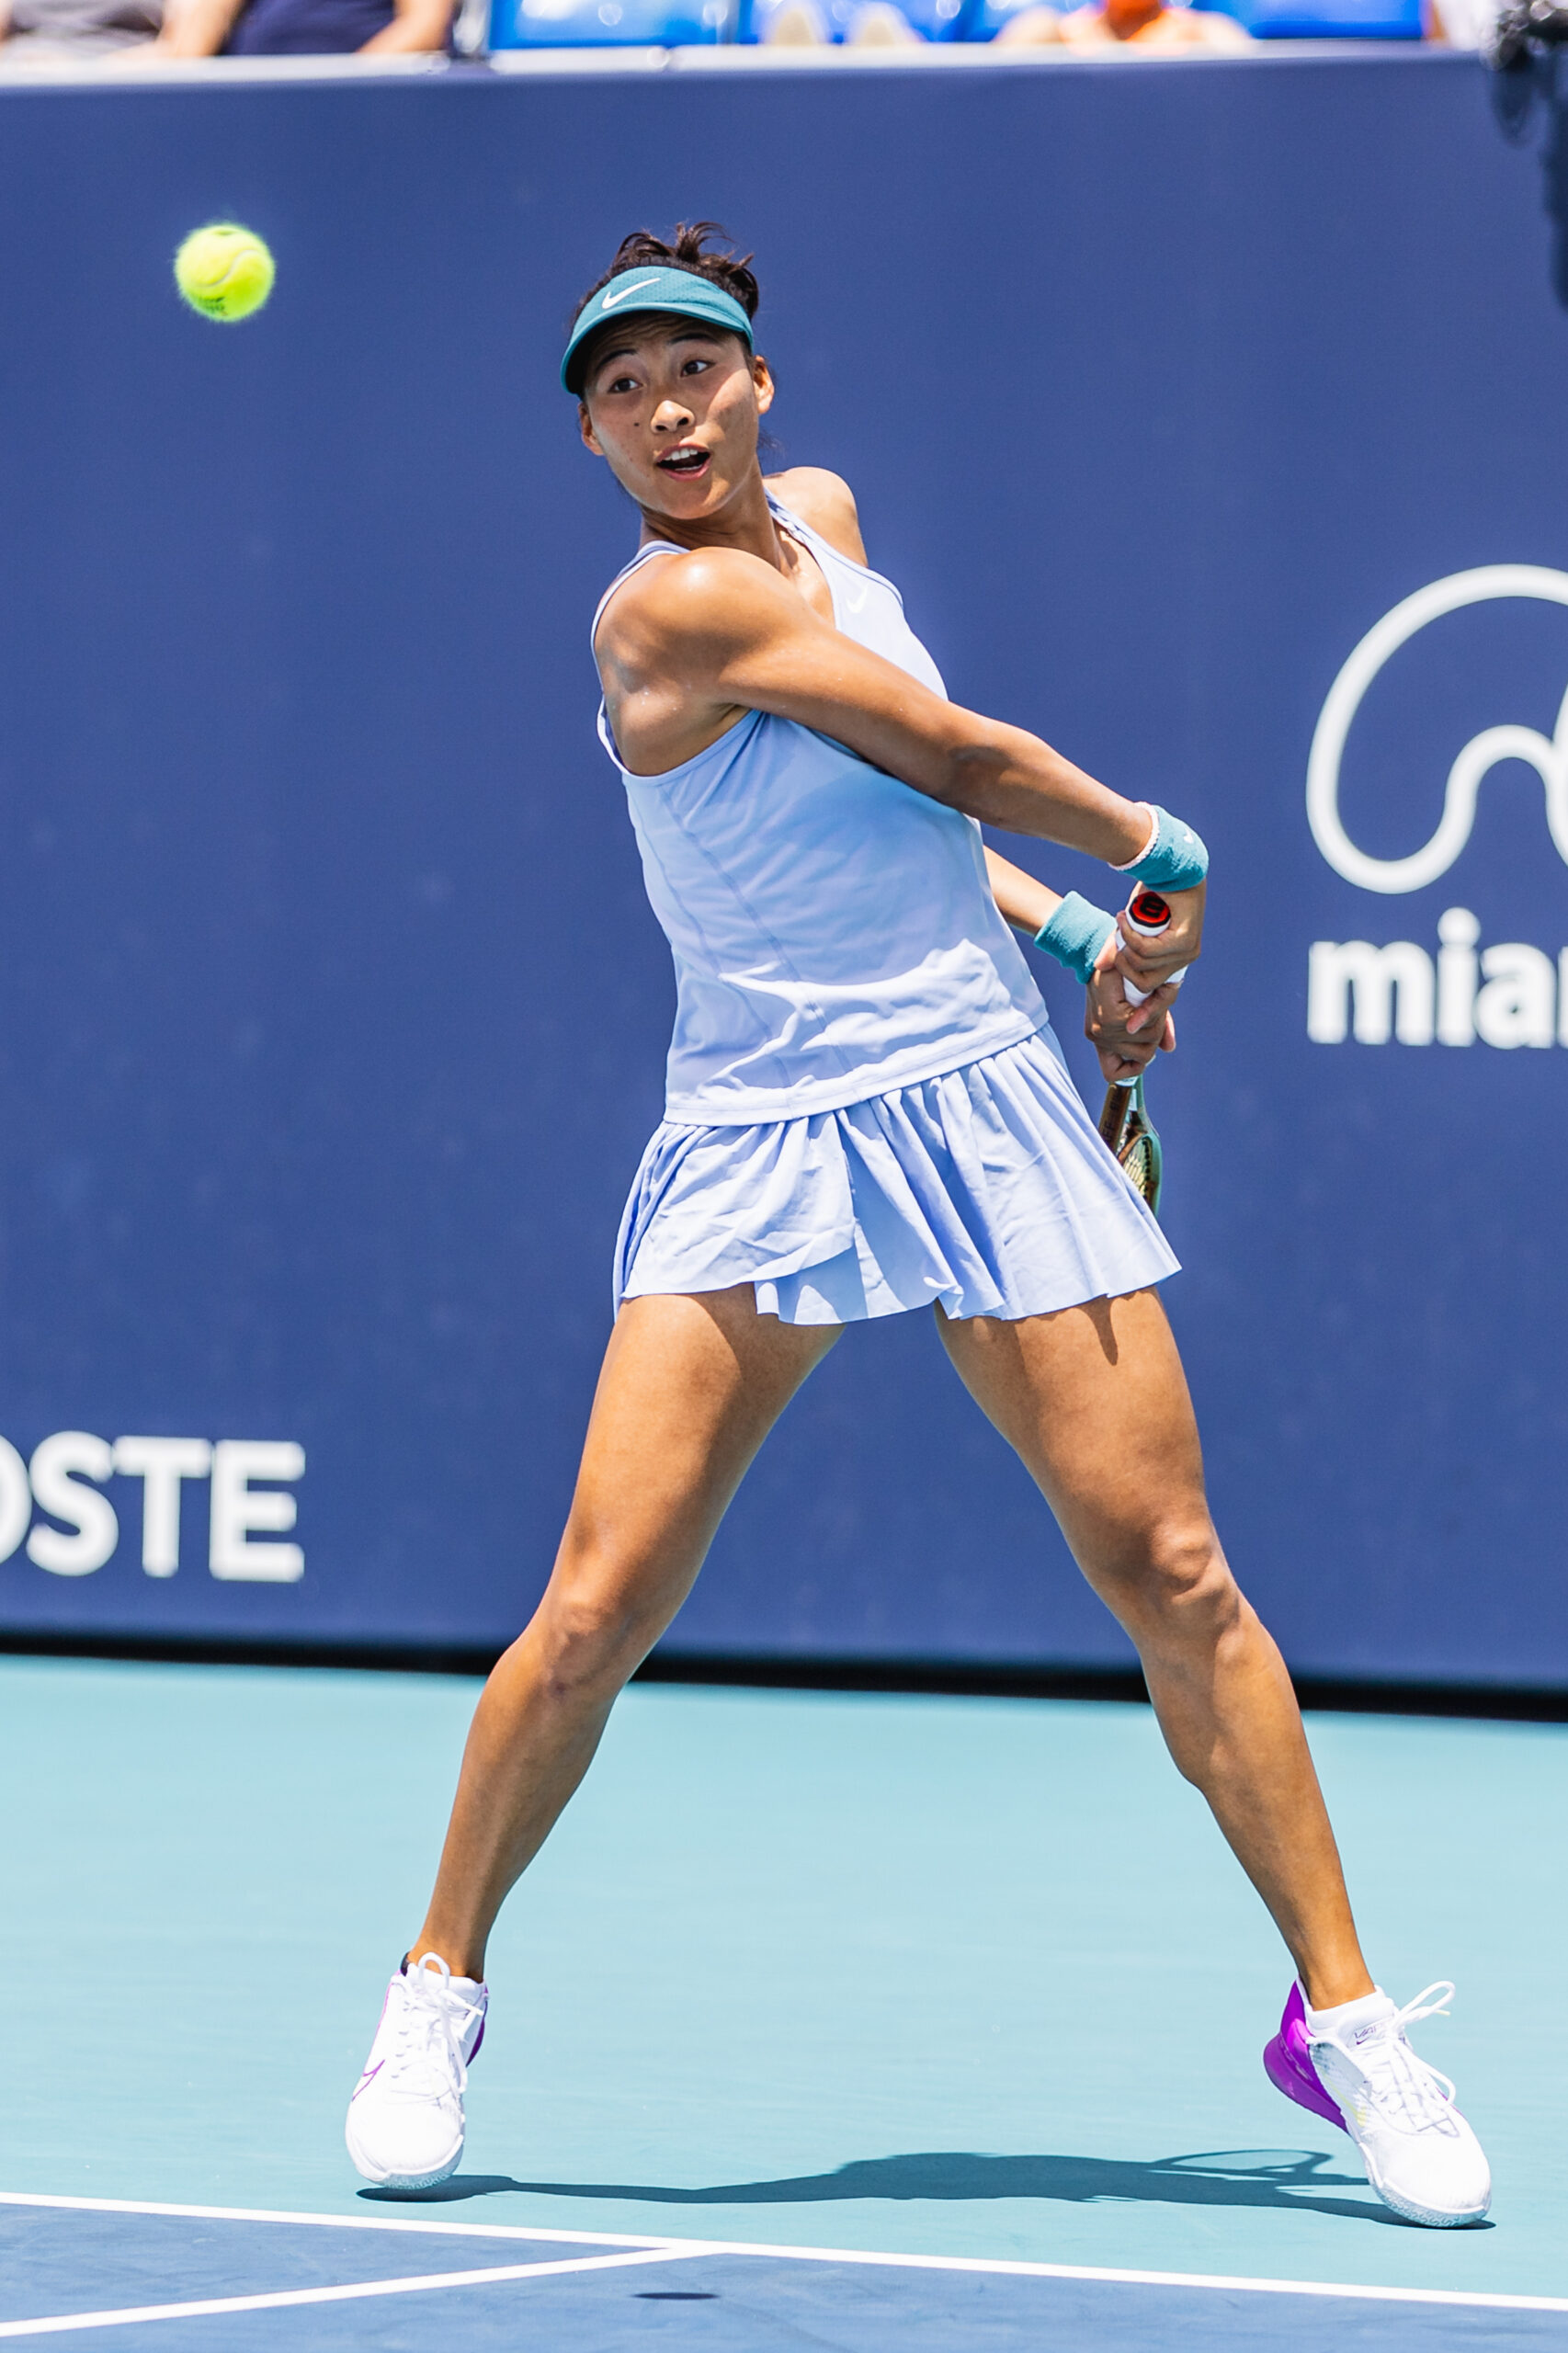 Qinwen Zheng on March 27, 2023 at the Miami Open